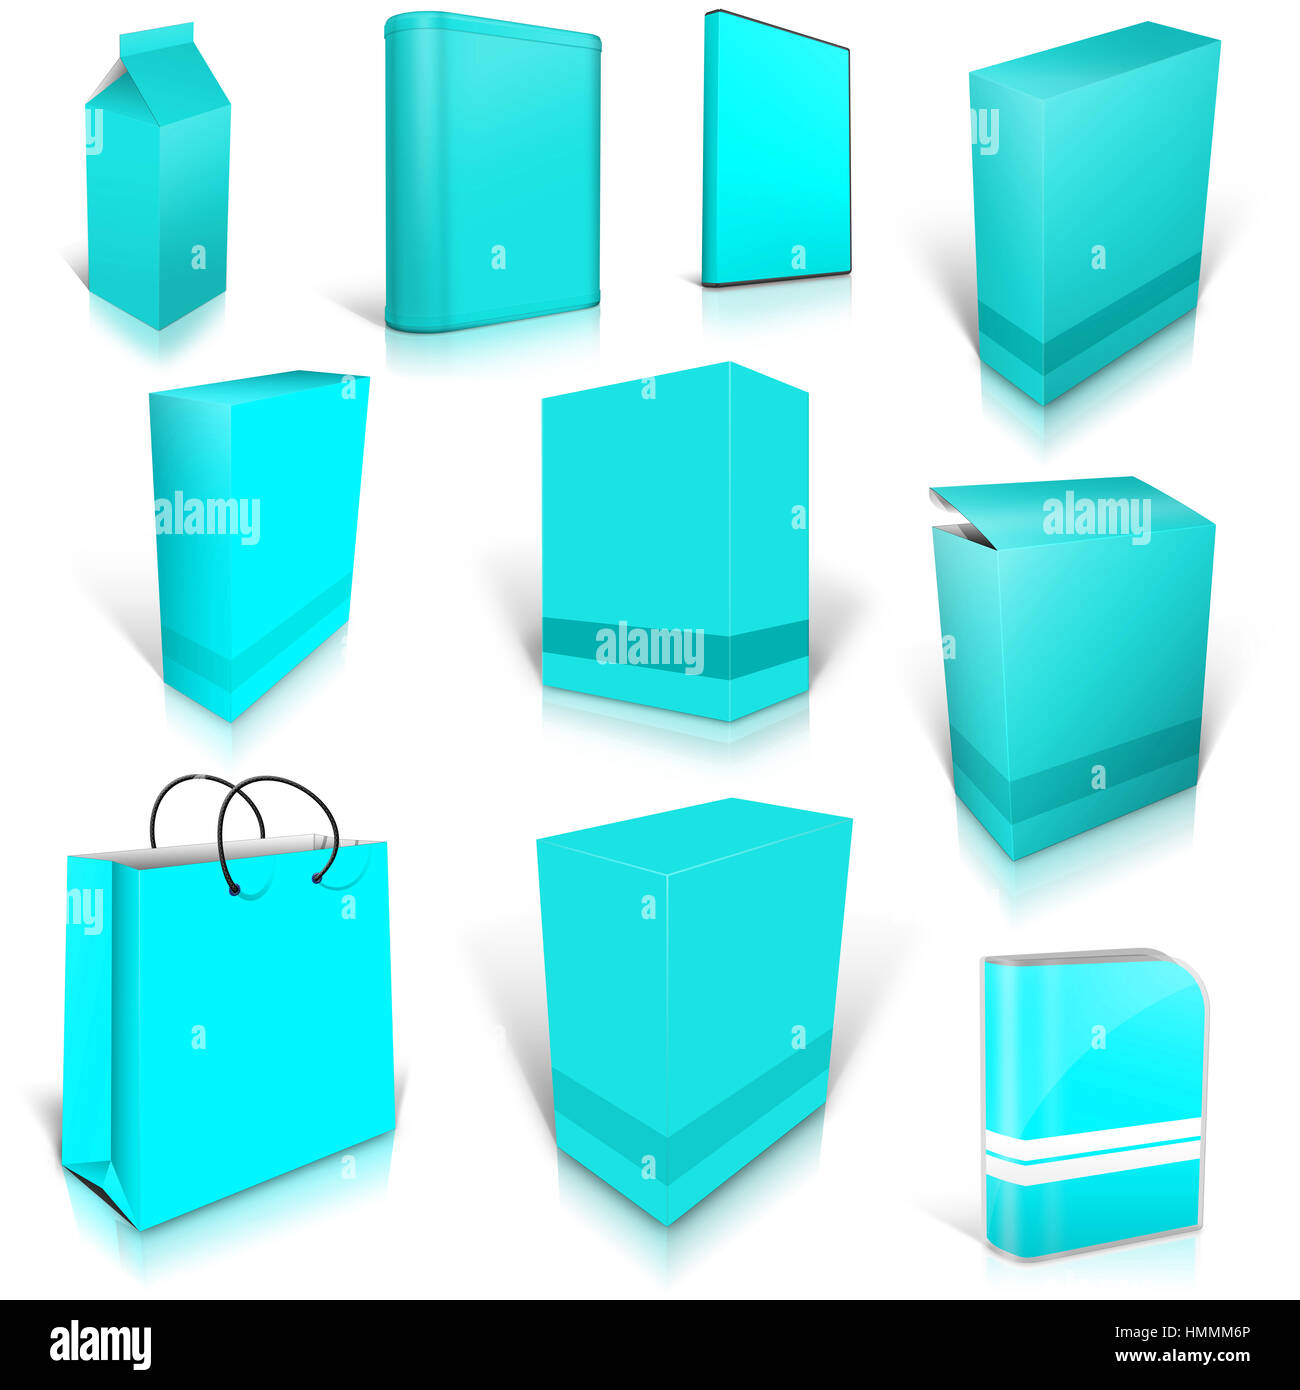 Ten cyan blank boxes isolated on white background ready to be personalized by you. Stock Photo